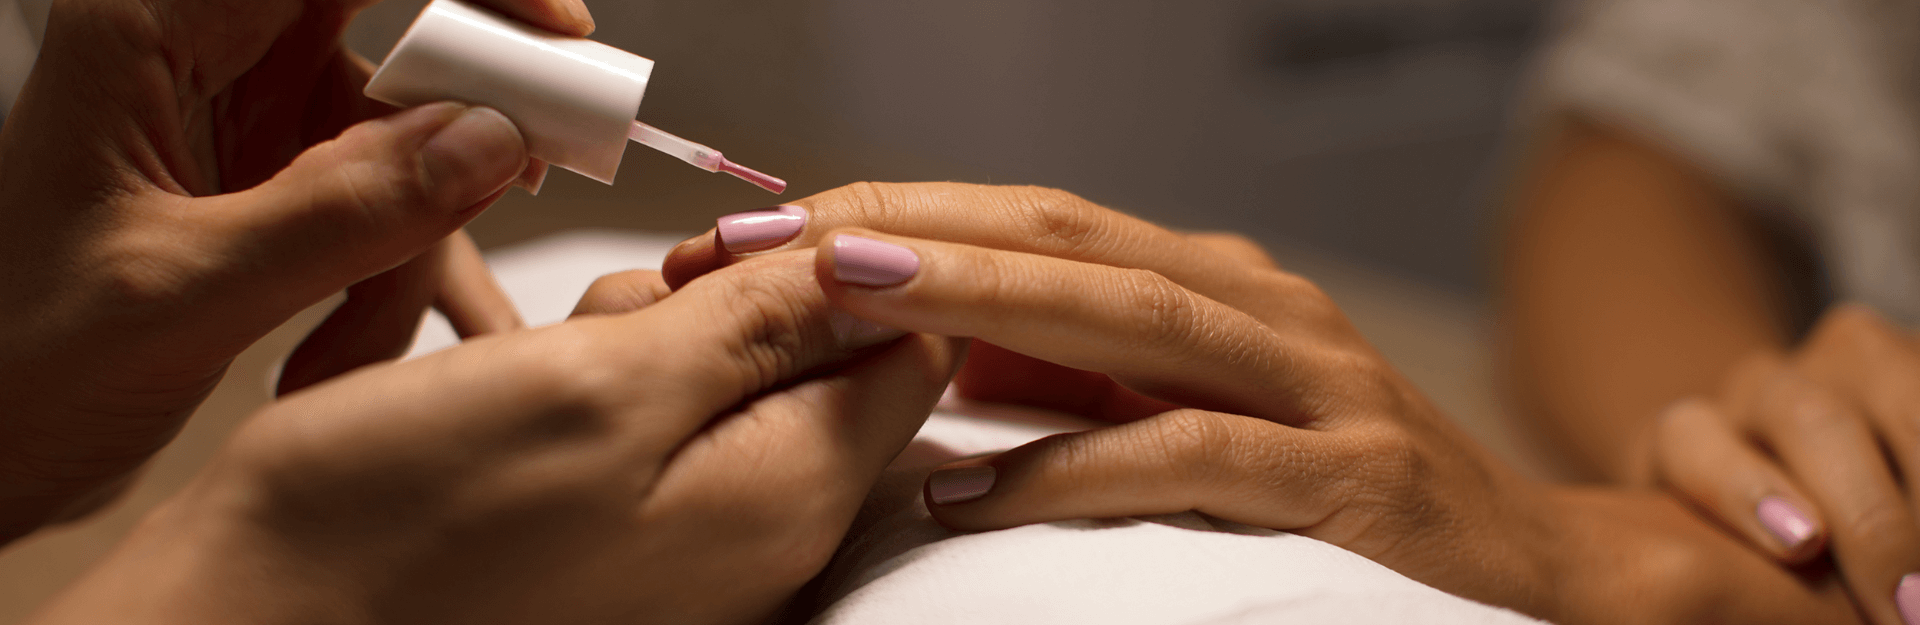 Close up of a manicure with pink nail polish being applied